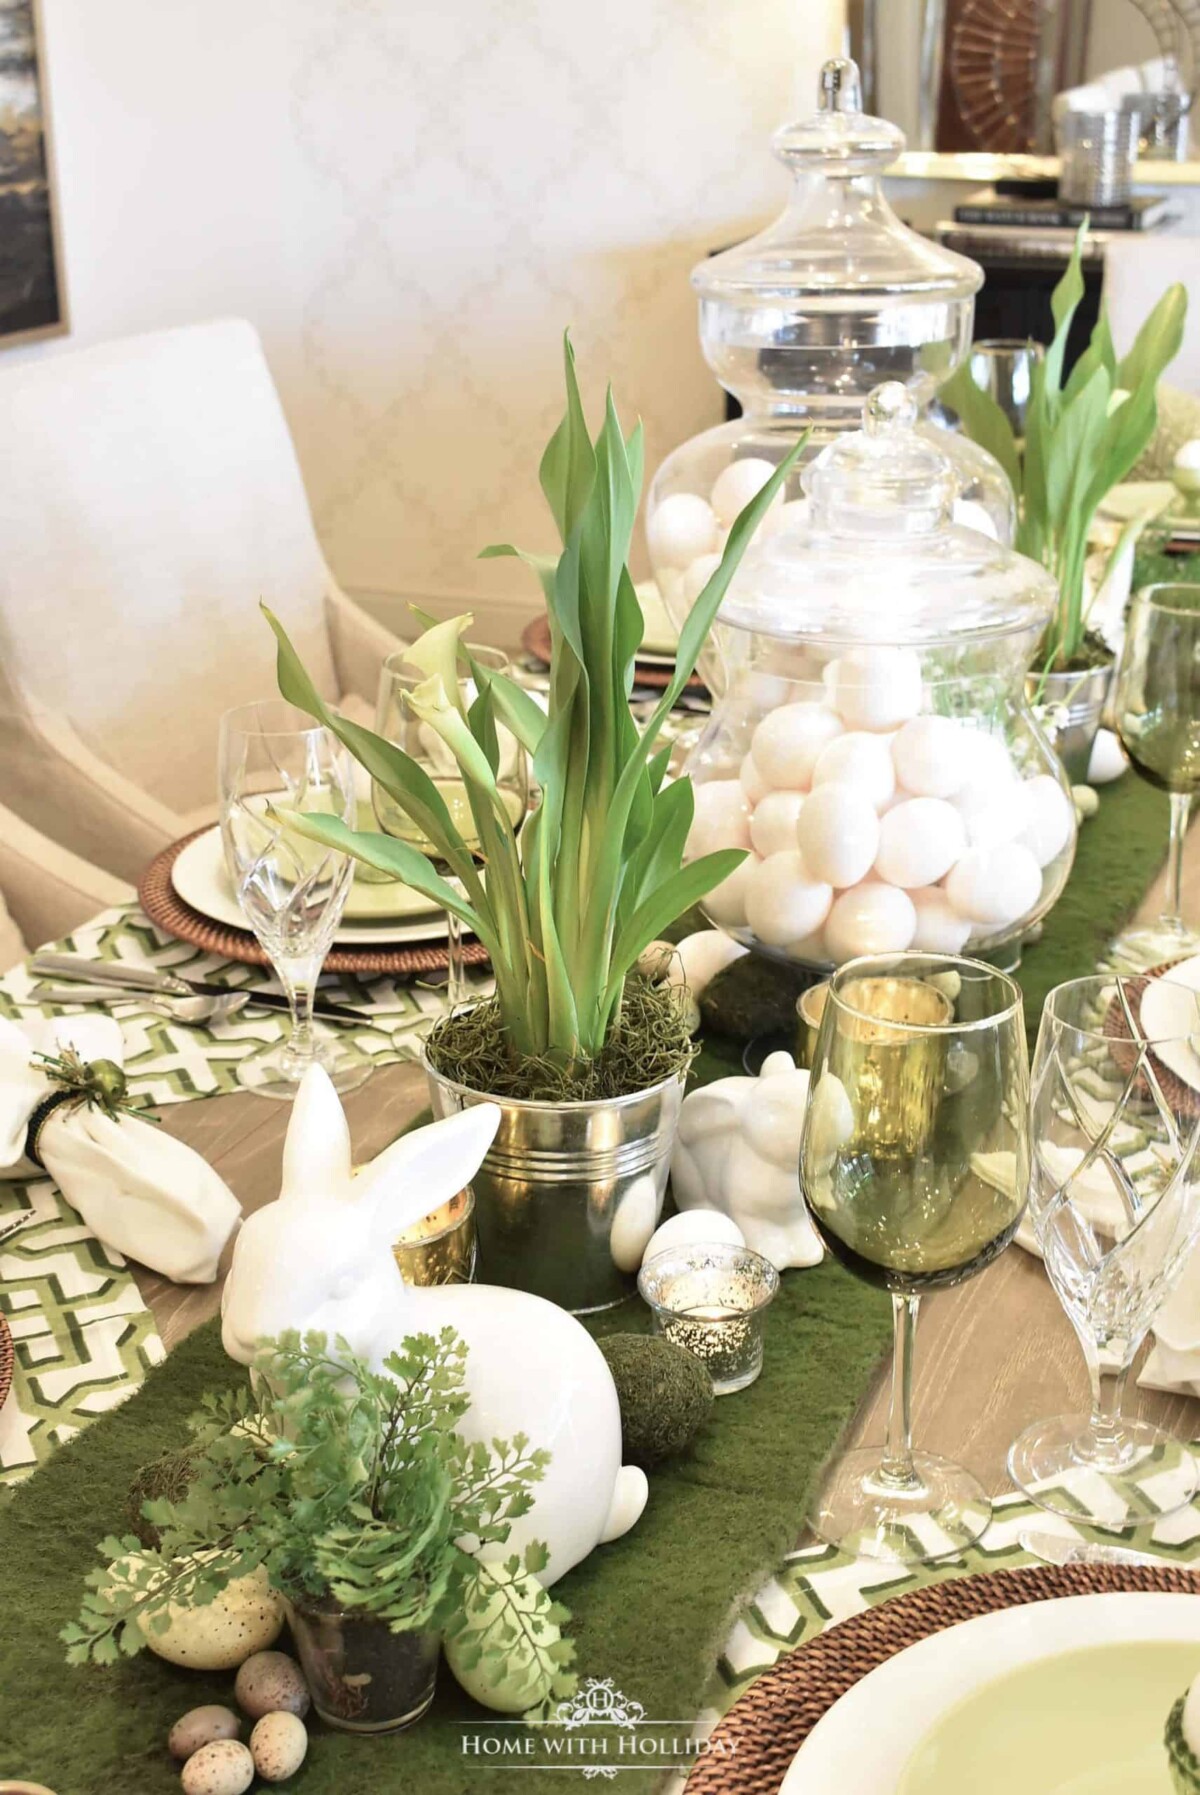 Elegant table setting with eggshell and green color scheme, green table runner, glass containers filled with eggs, and metal buckets with grass-like plants.